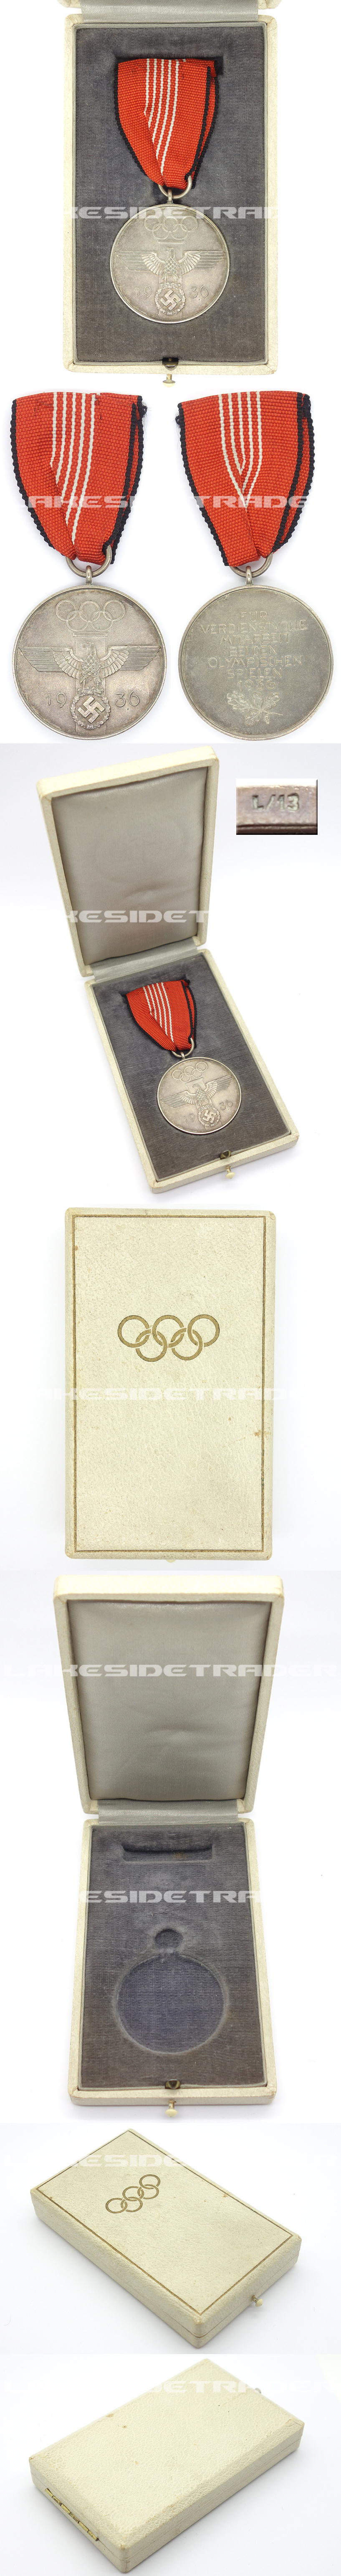 Cased Olympic Memorial Medal 1936 by L/13